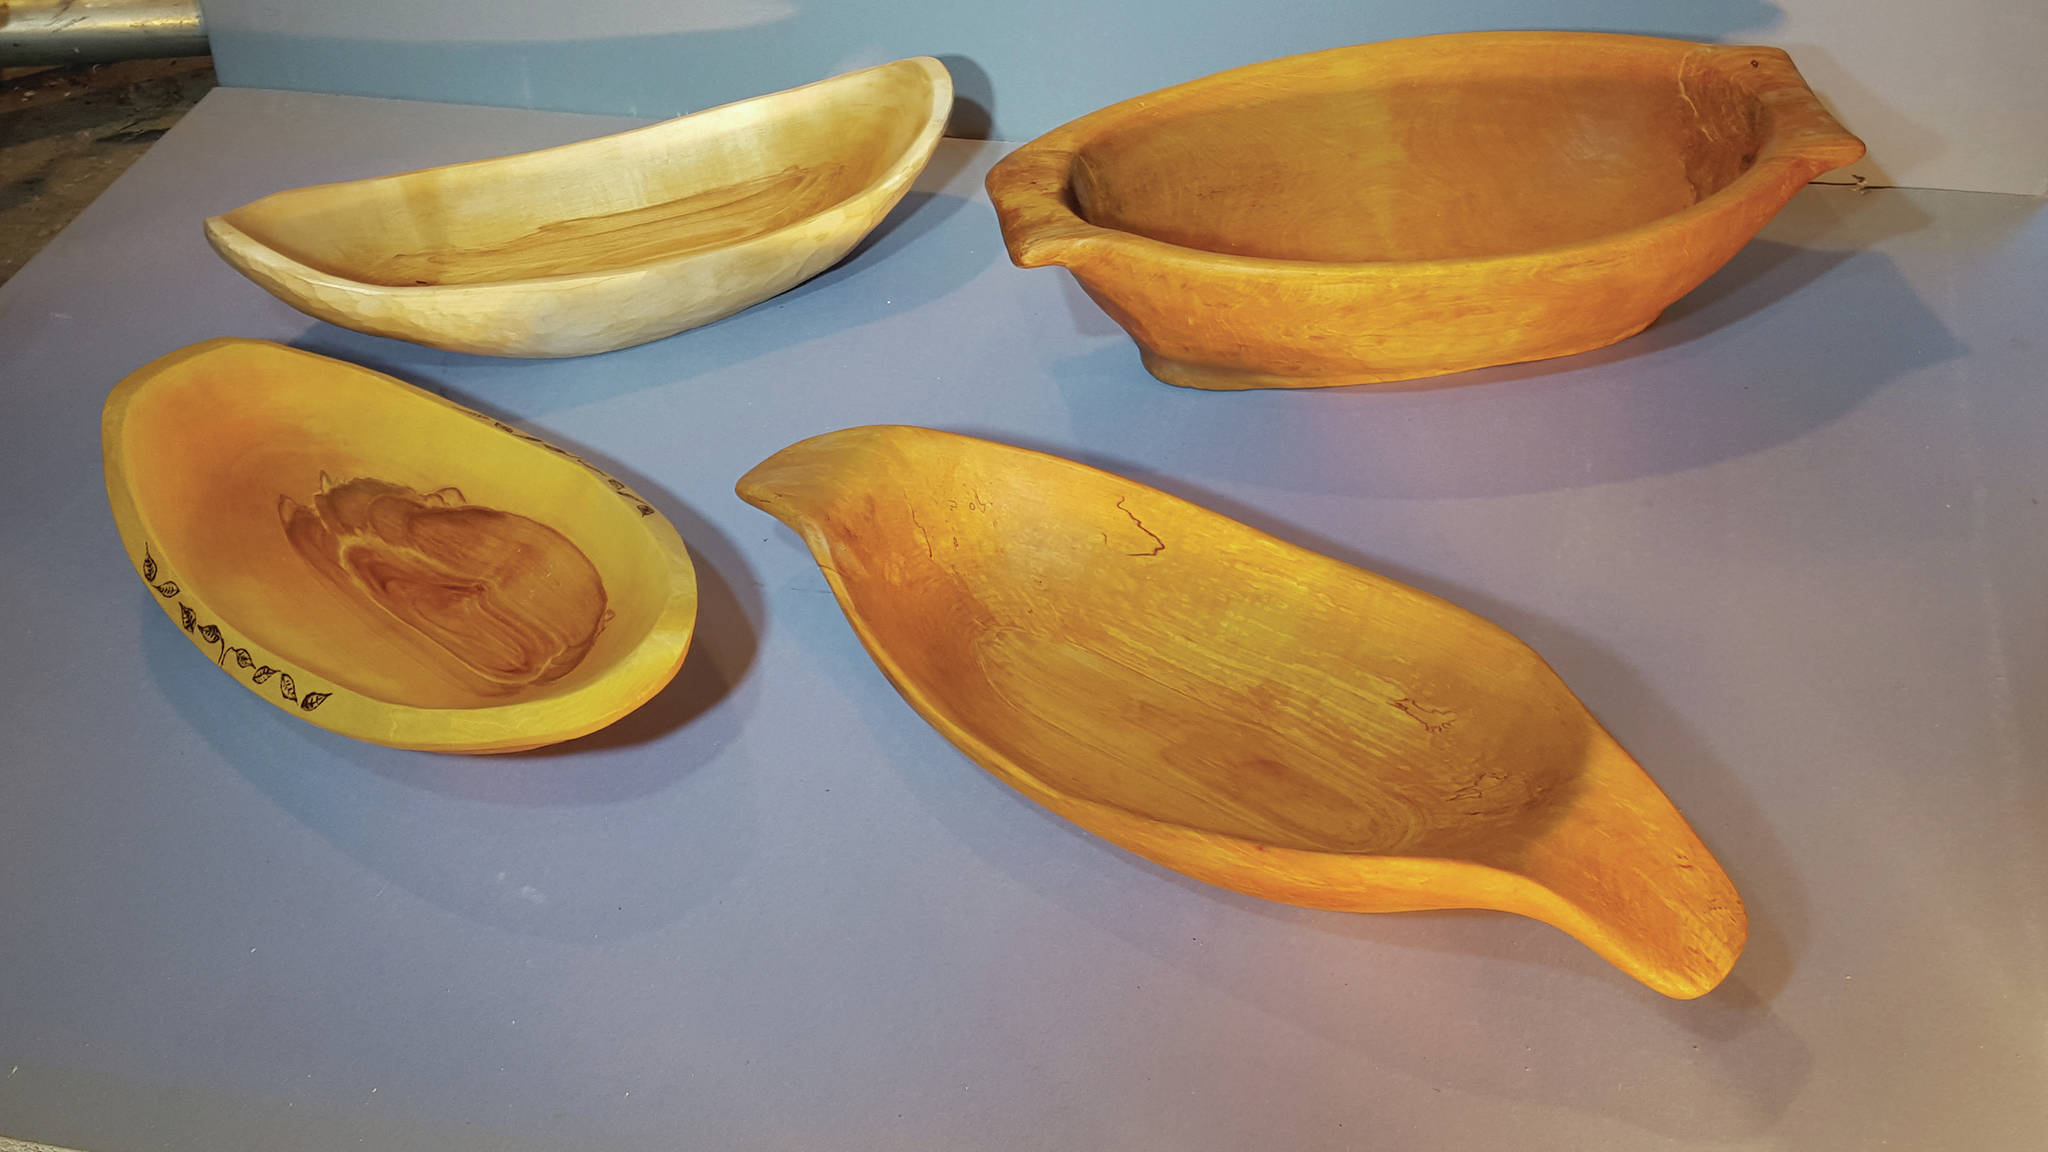 These bowls by woodworker Bob Ritchie are part of his show for October 2020 at Ptarmigan Arts in Homer, Alaska. (Photo courtesy of Ptarmigan Arts)